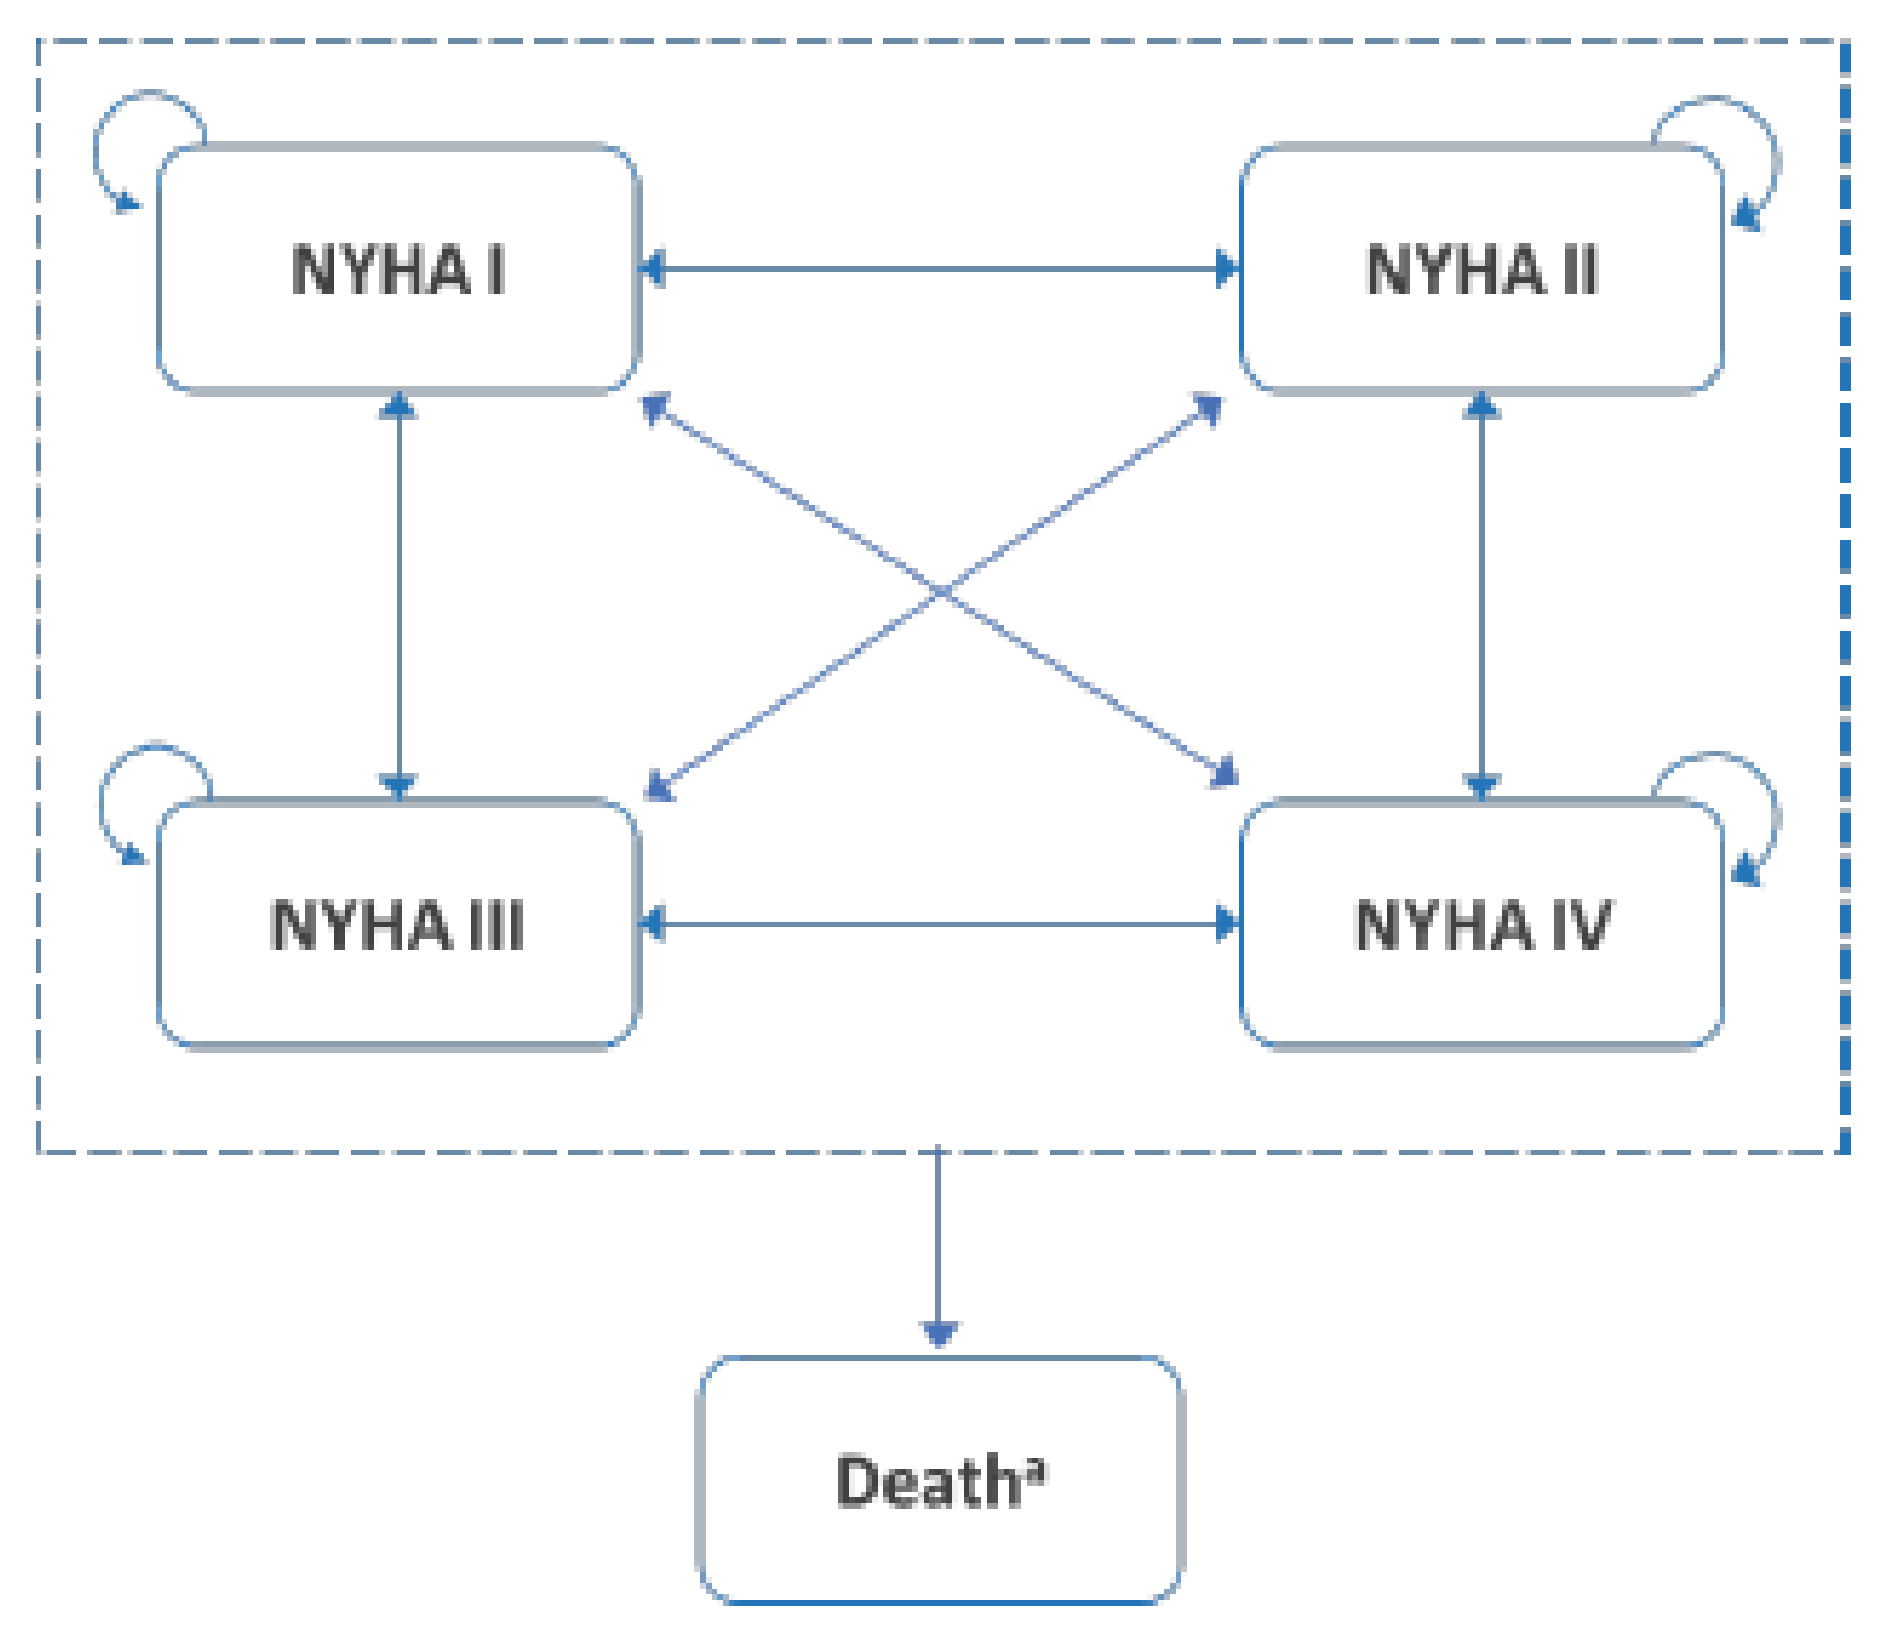 Diagram showing patient movement through the different health states in the sponsor’s submitted economic model. The model health states were based on New York Heart Association classes. In each cycle, patients could transition to a higher or lower class, could remain in the same state, or die.